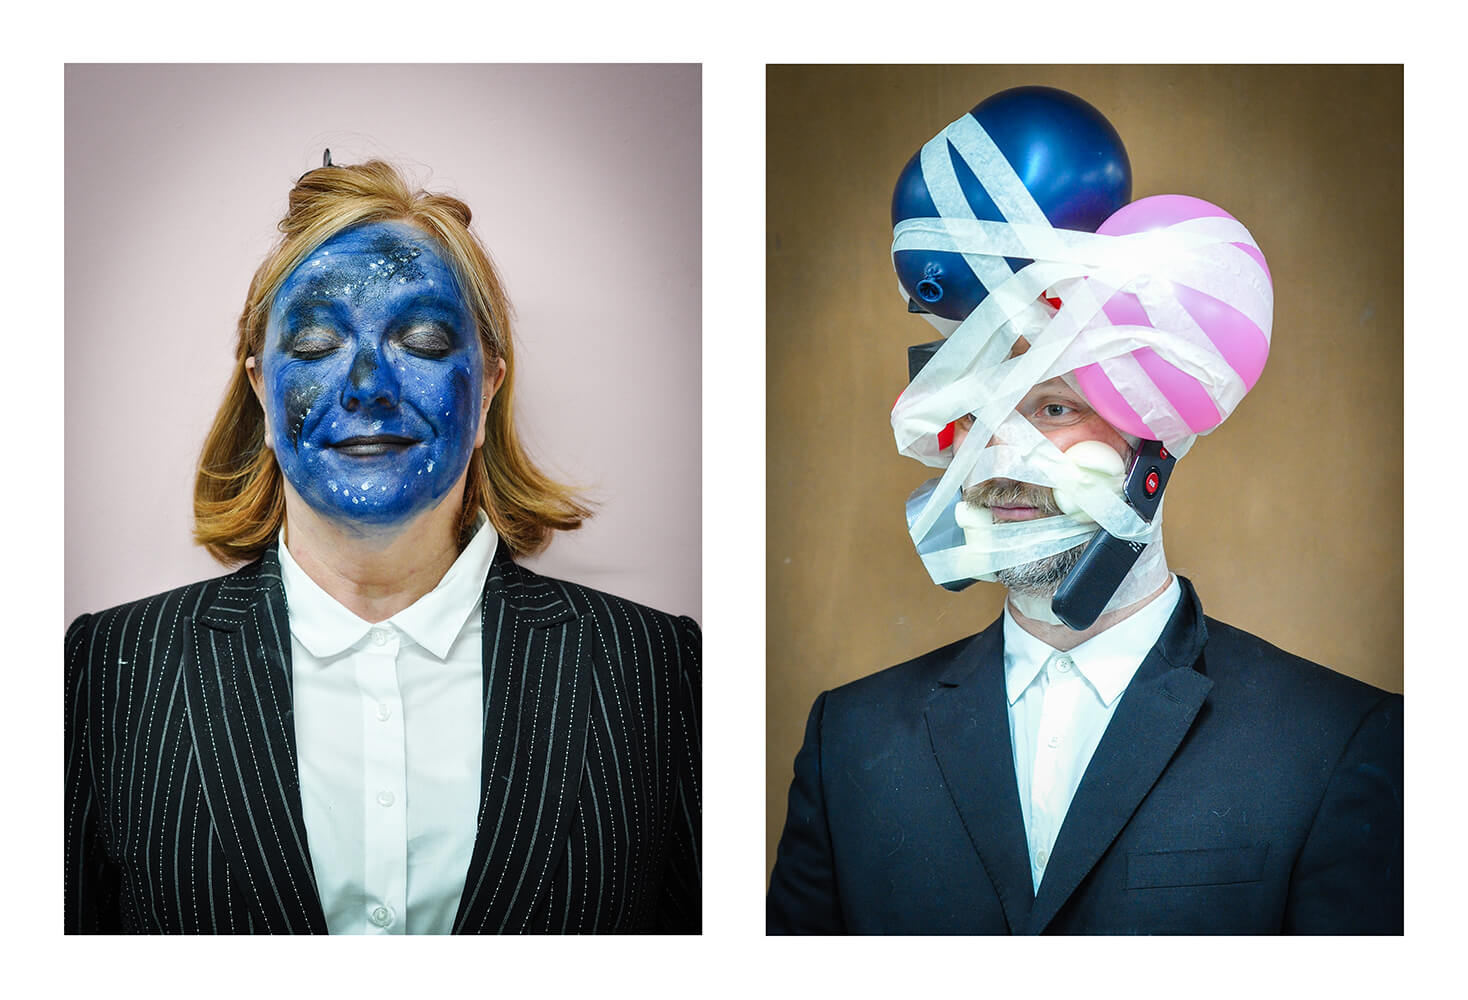 A woman with a blue painted face and a man with balloons taped to his face